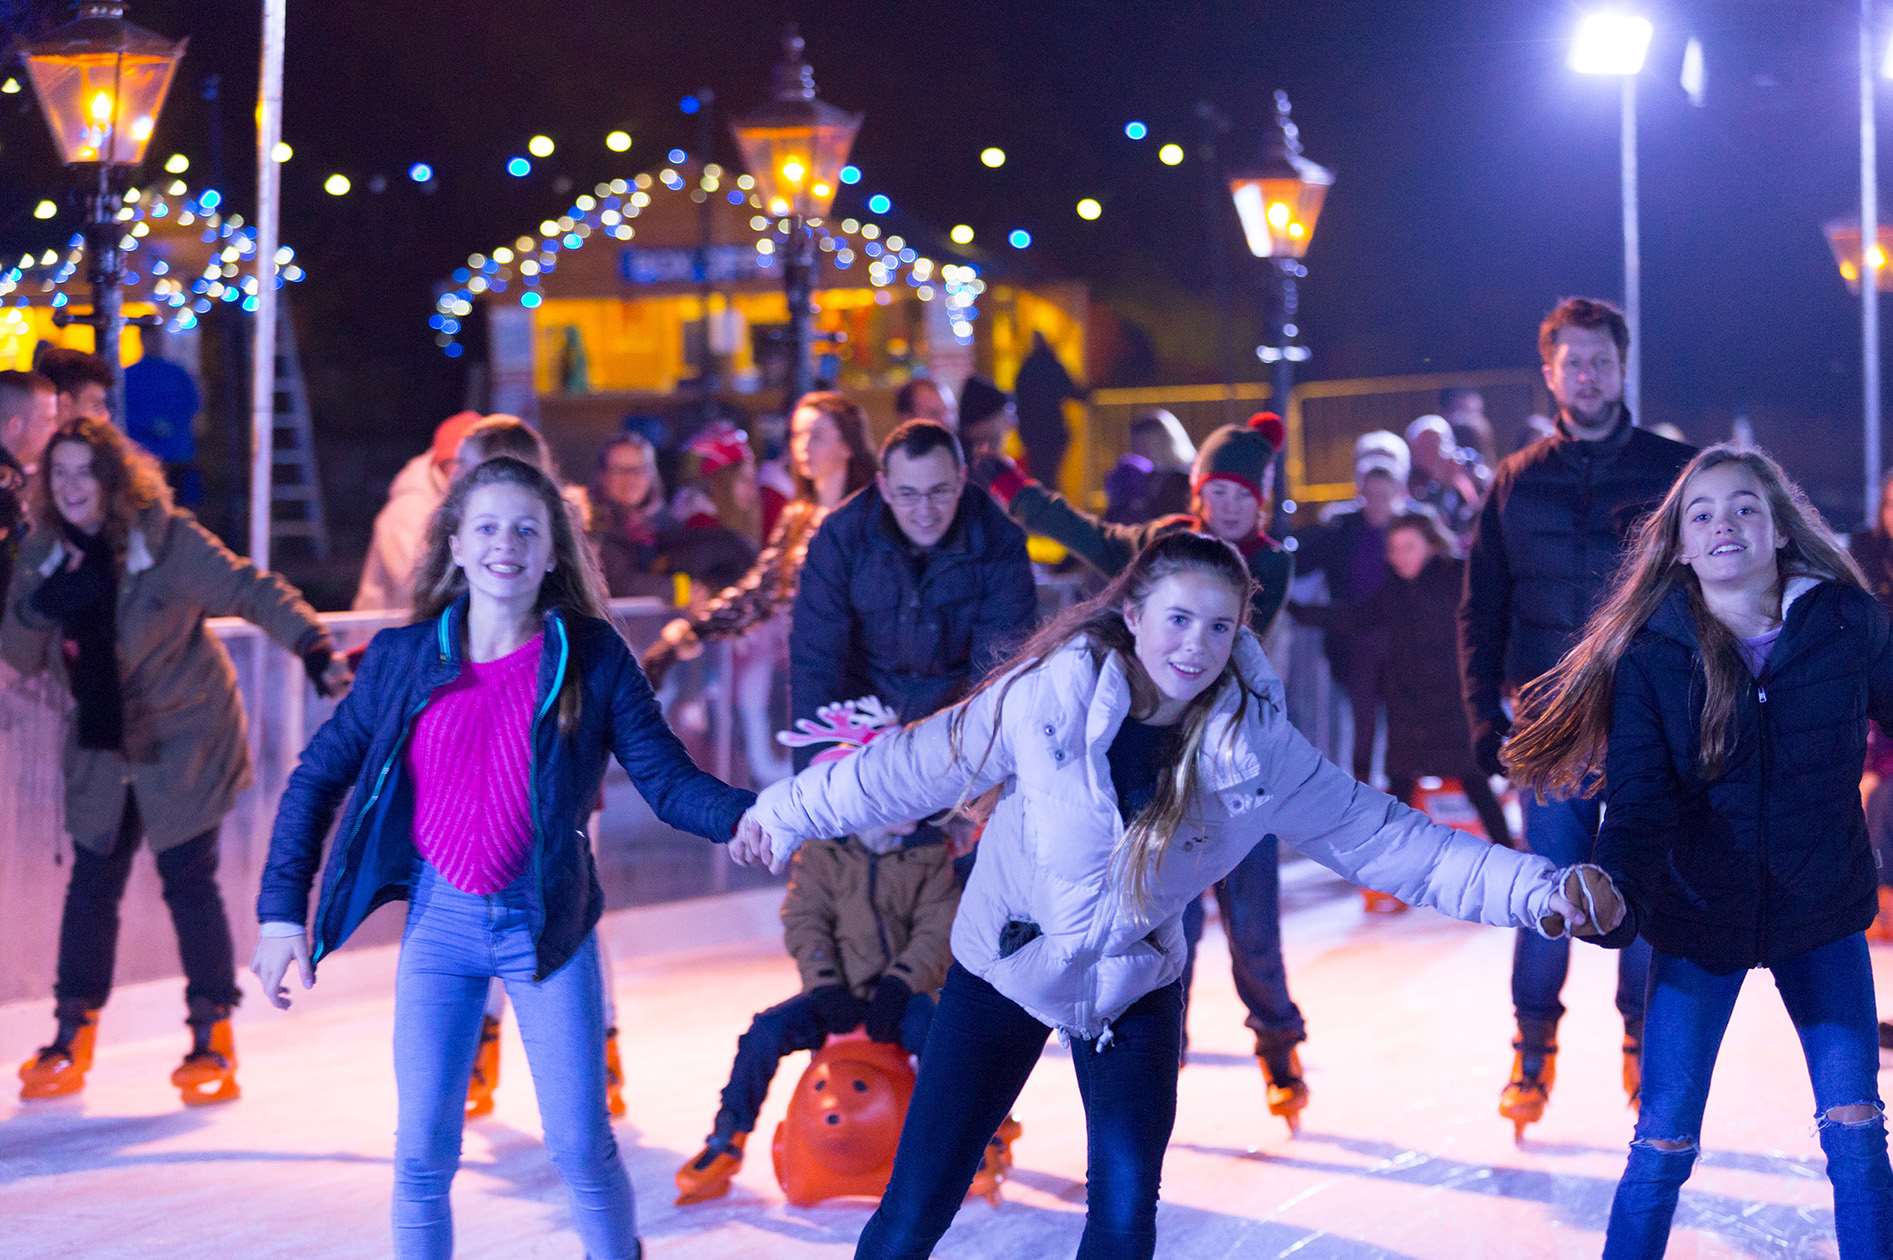 The ice rink was officially opened on Friday. Picture: David Bartholomew